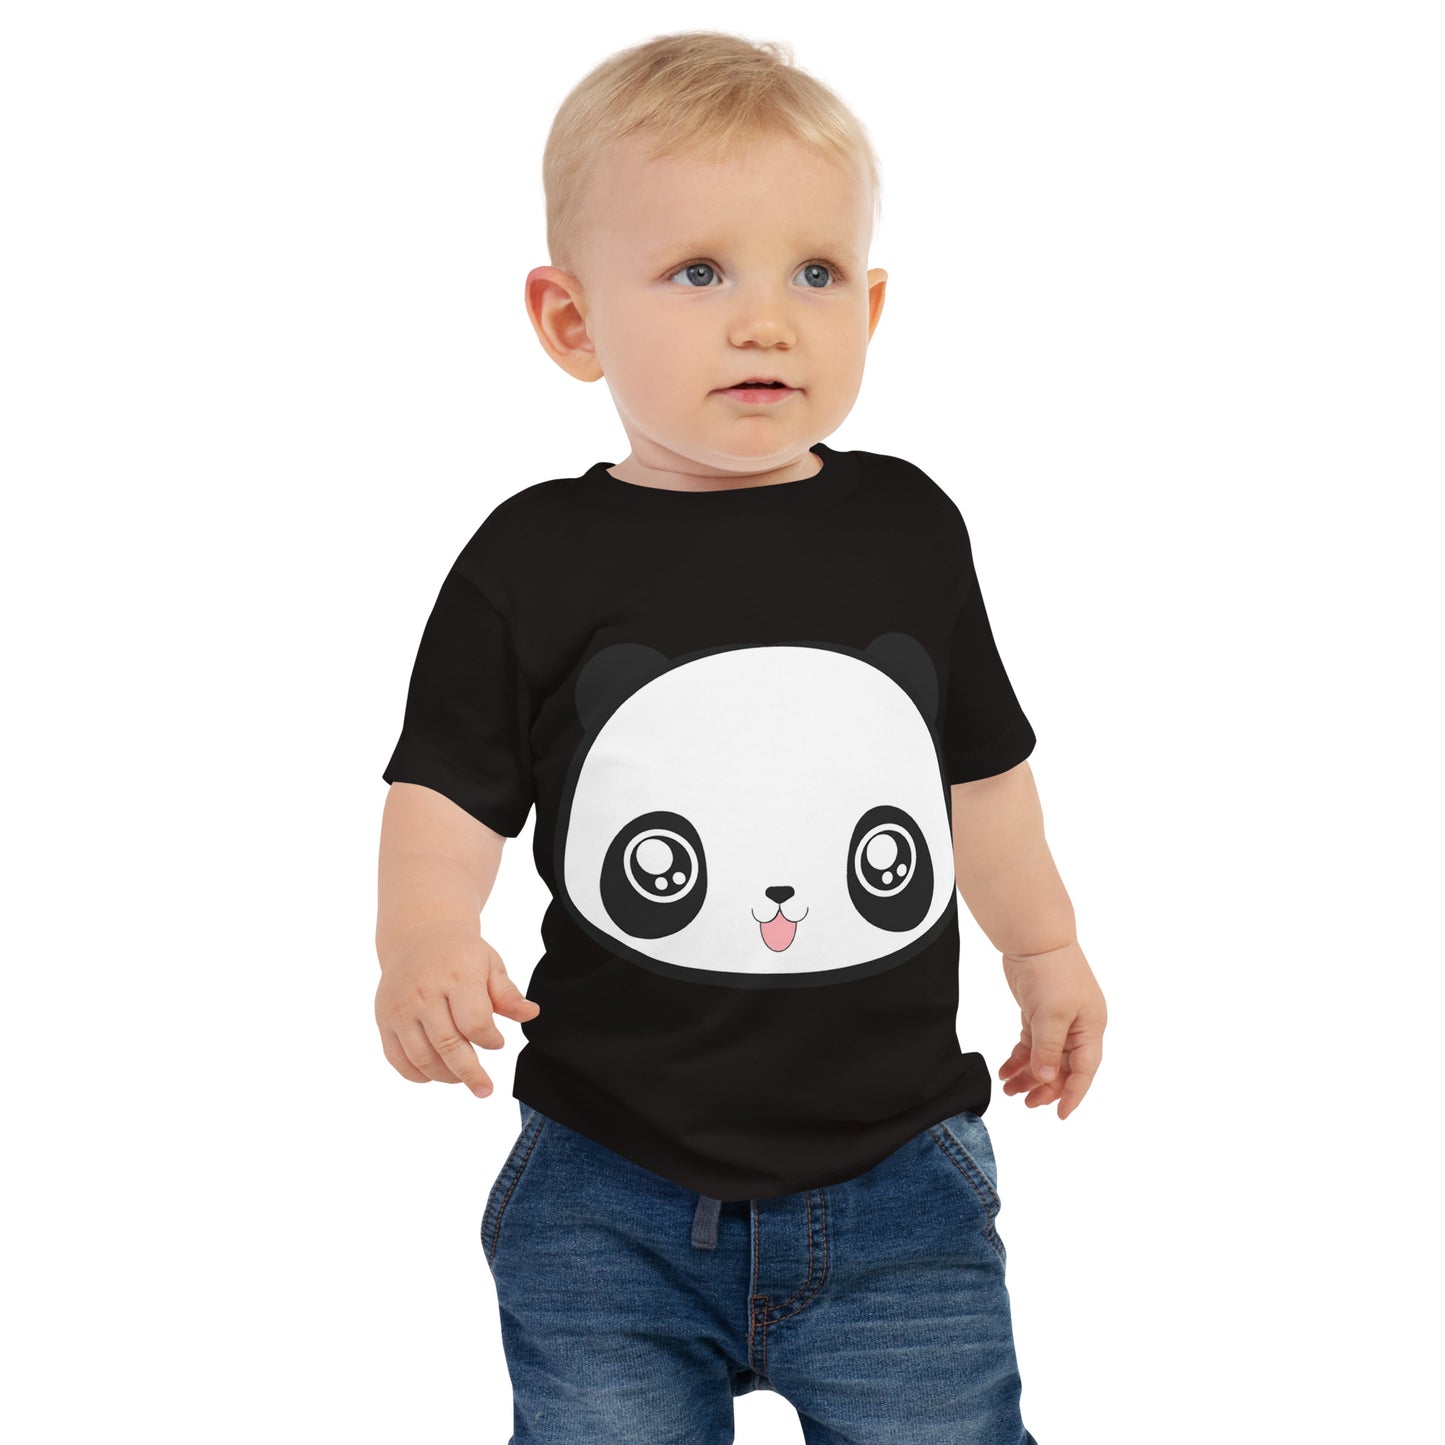 Baby with black T-shirt with print of panda head